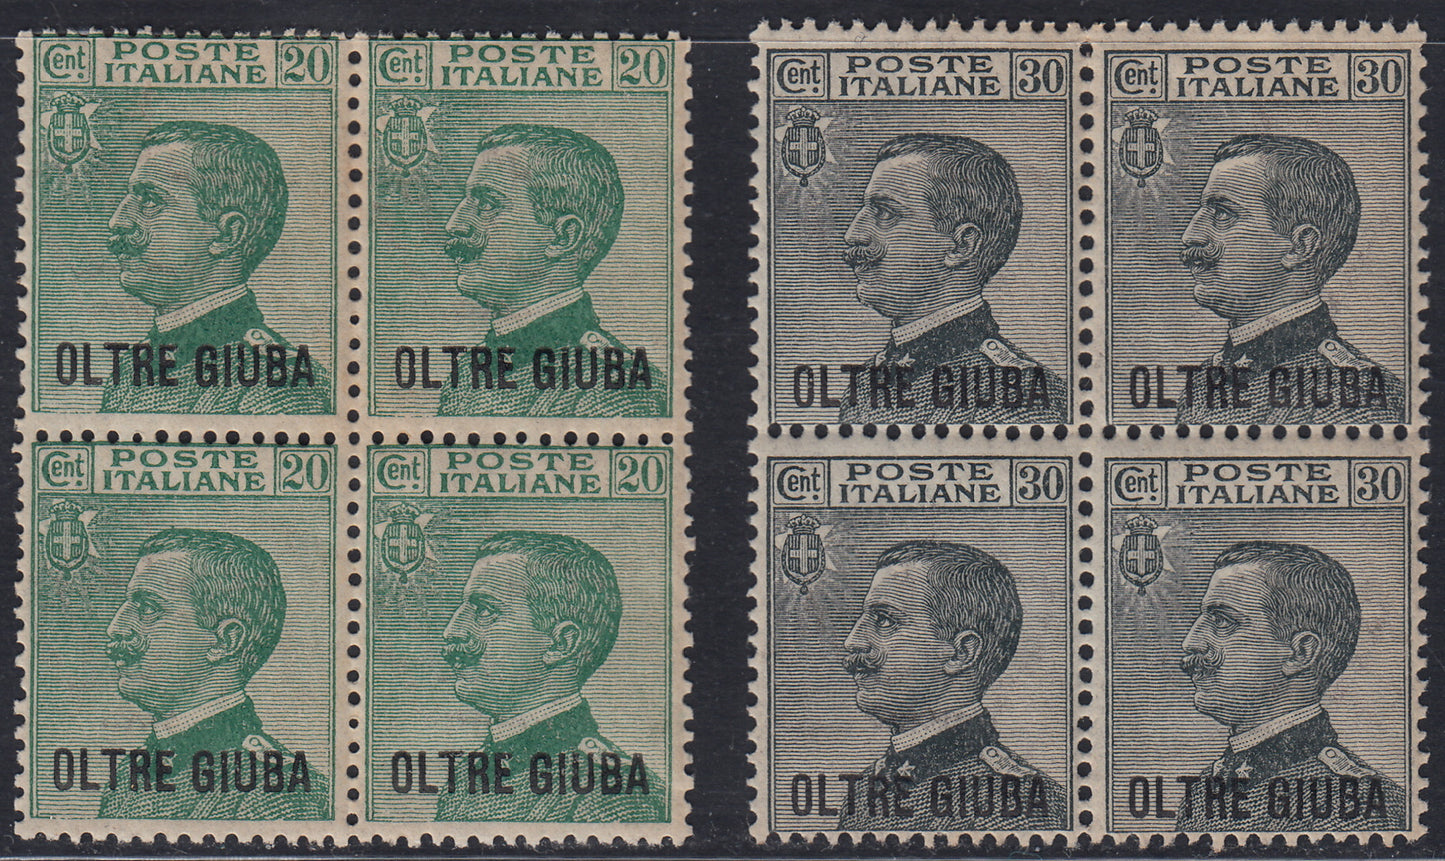 OG14- 1925 - Oltre Giuba ordinary series, 2 stamps with overprint in stick character "OLTRE GIUBA" in new blocks of uncut rubber (16/17) 